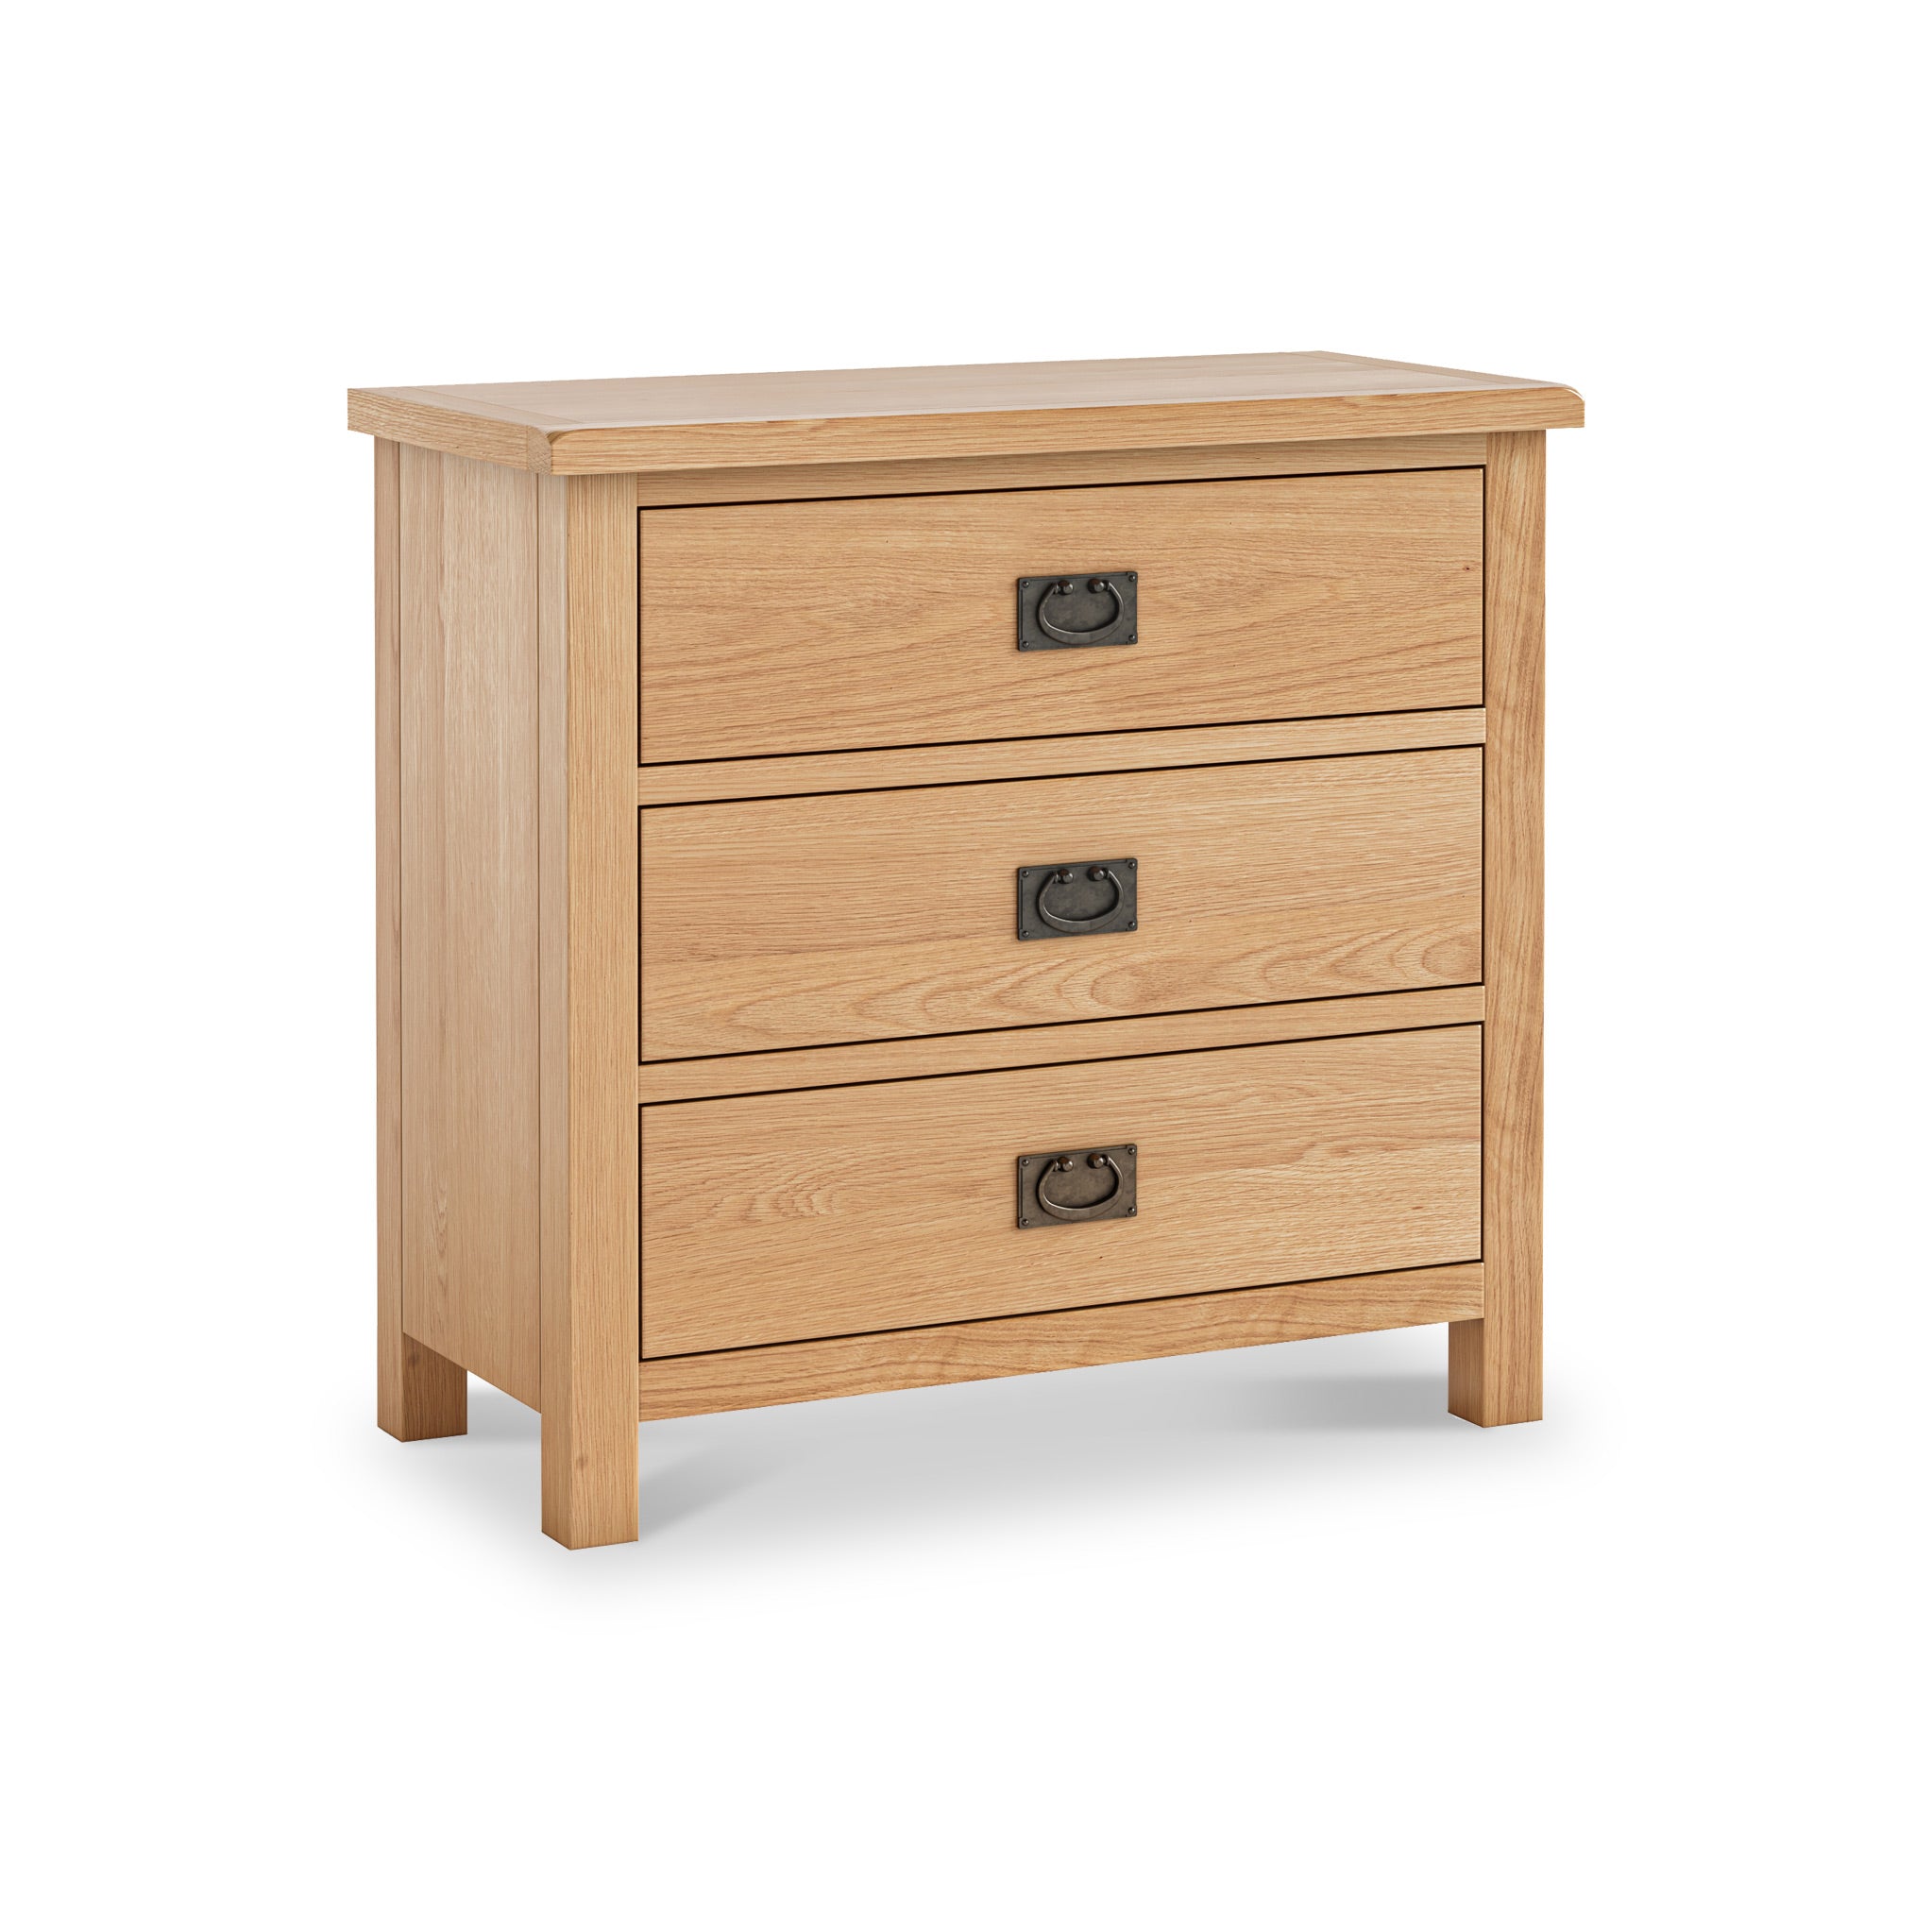 Albury Oak Wide Wooden Chest Of 3 Drawers